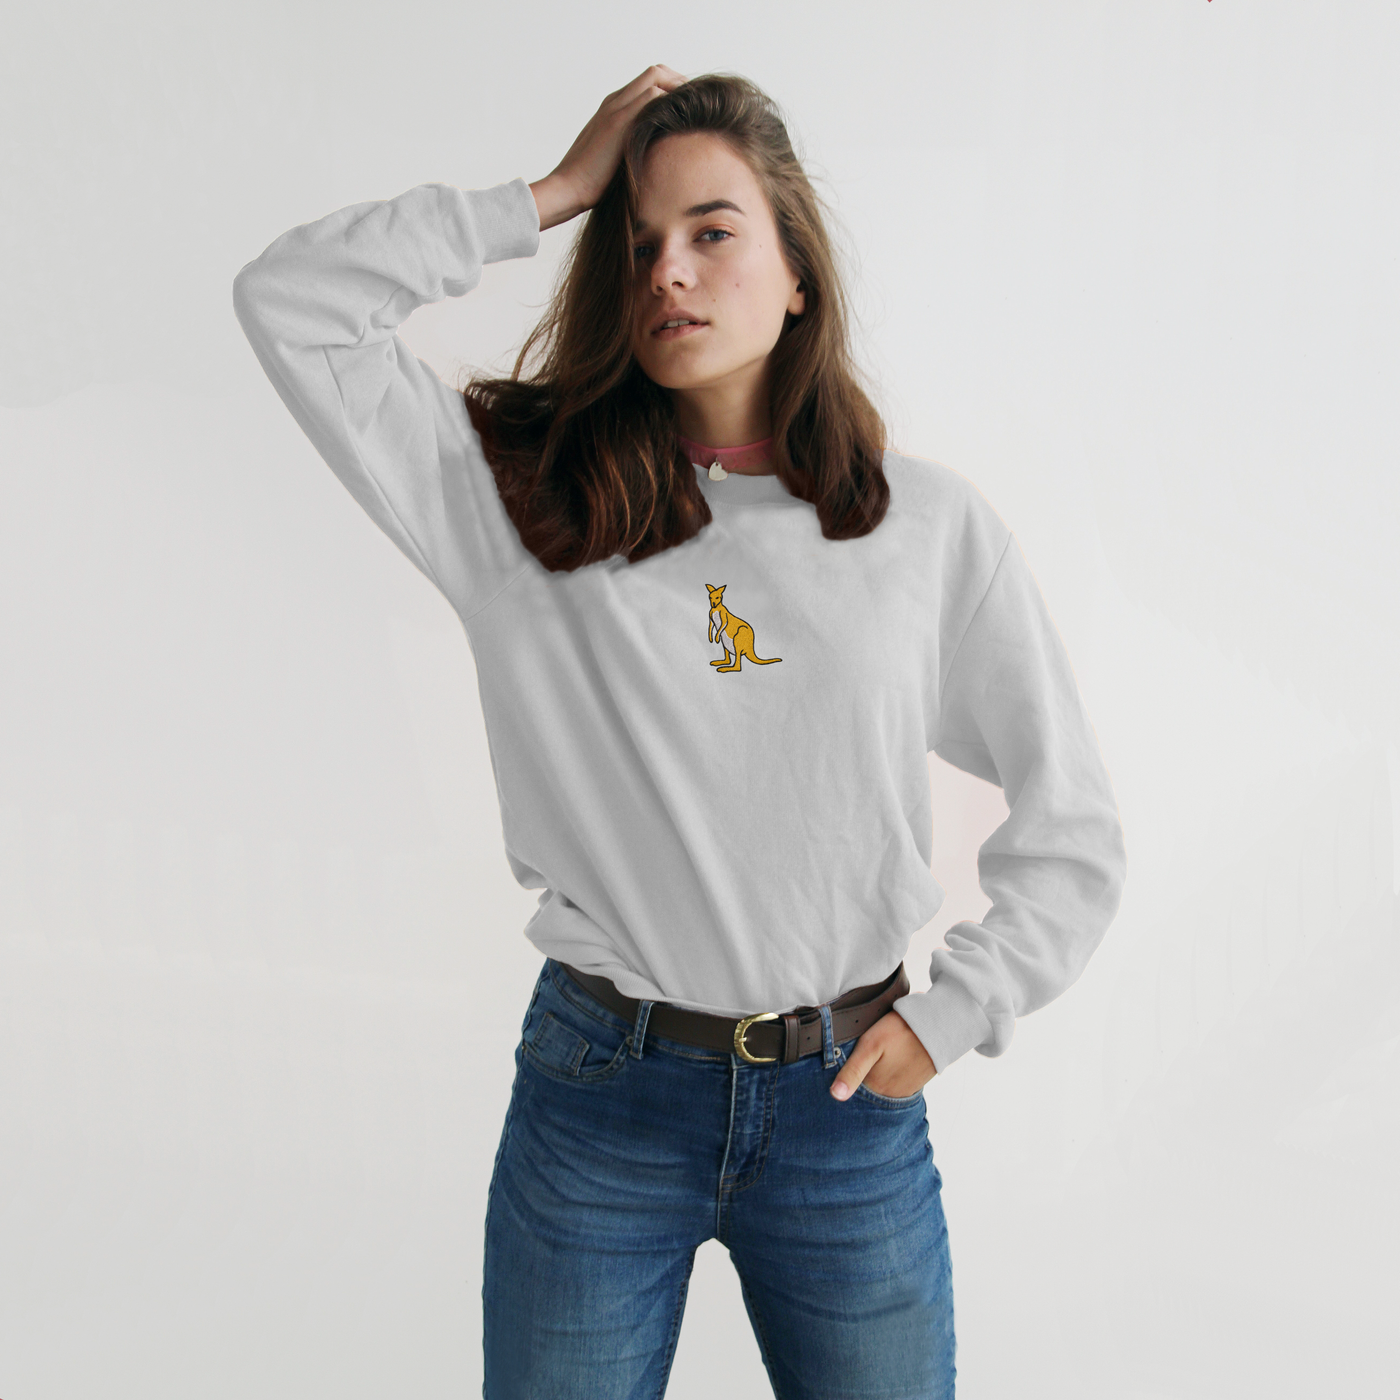 Bobby's Planet Women's Embroidered Kangaroo Long Sleeve Shirt from Australia Down Under Animals Collection in White Color#color_white